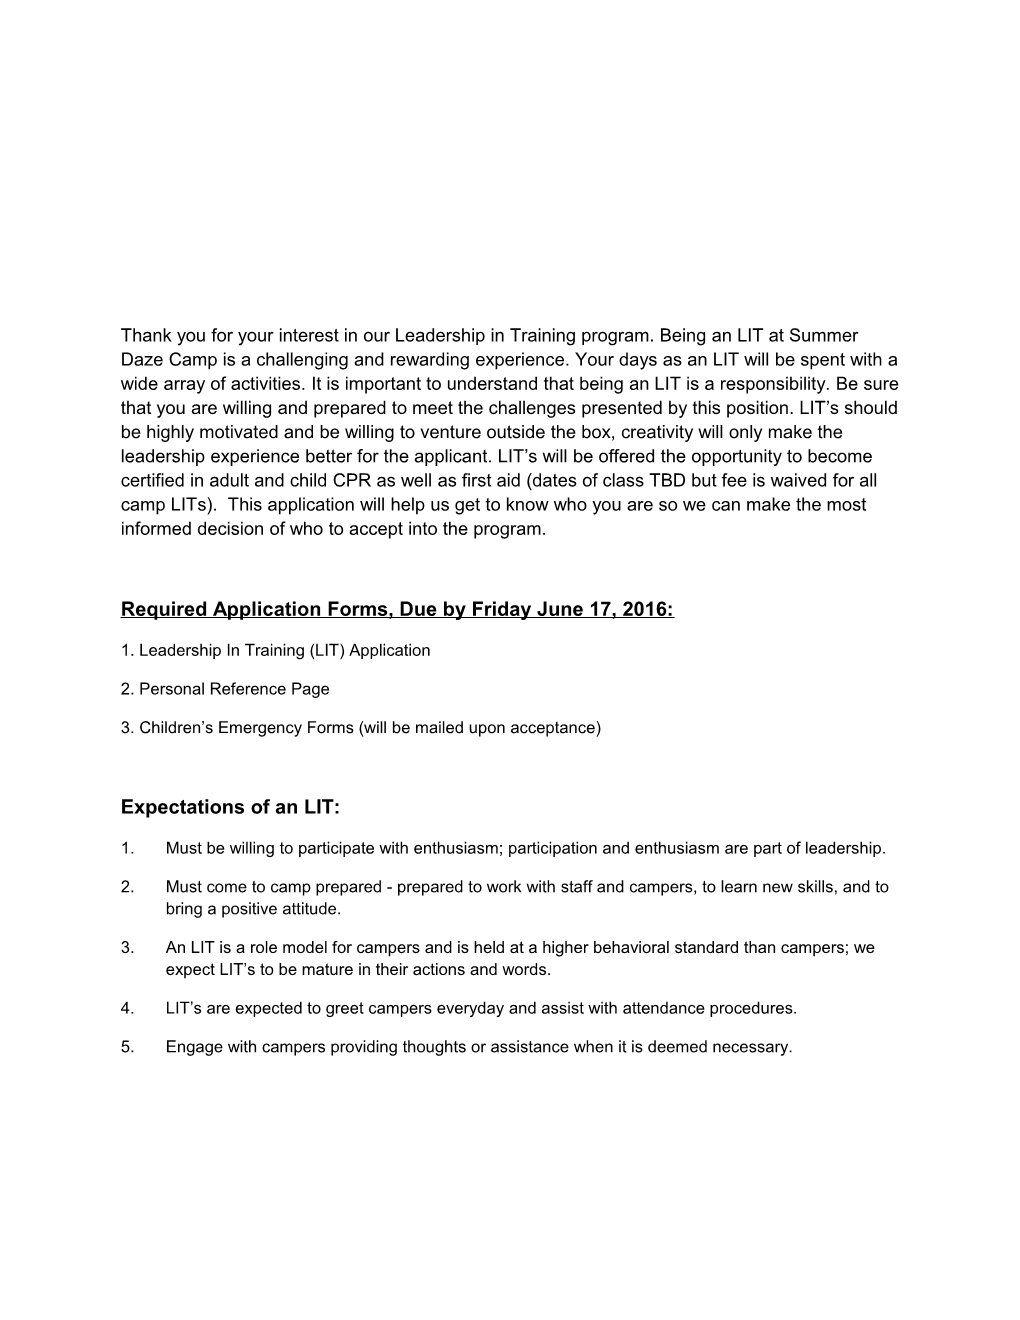 Required Application Forms, Due by Friday June 17, 2016